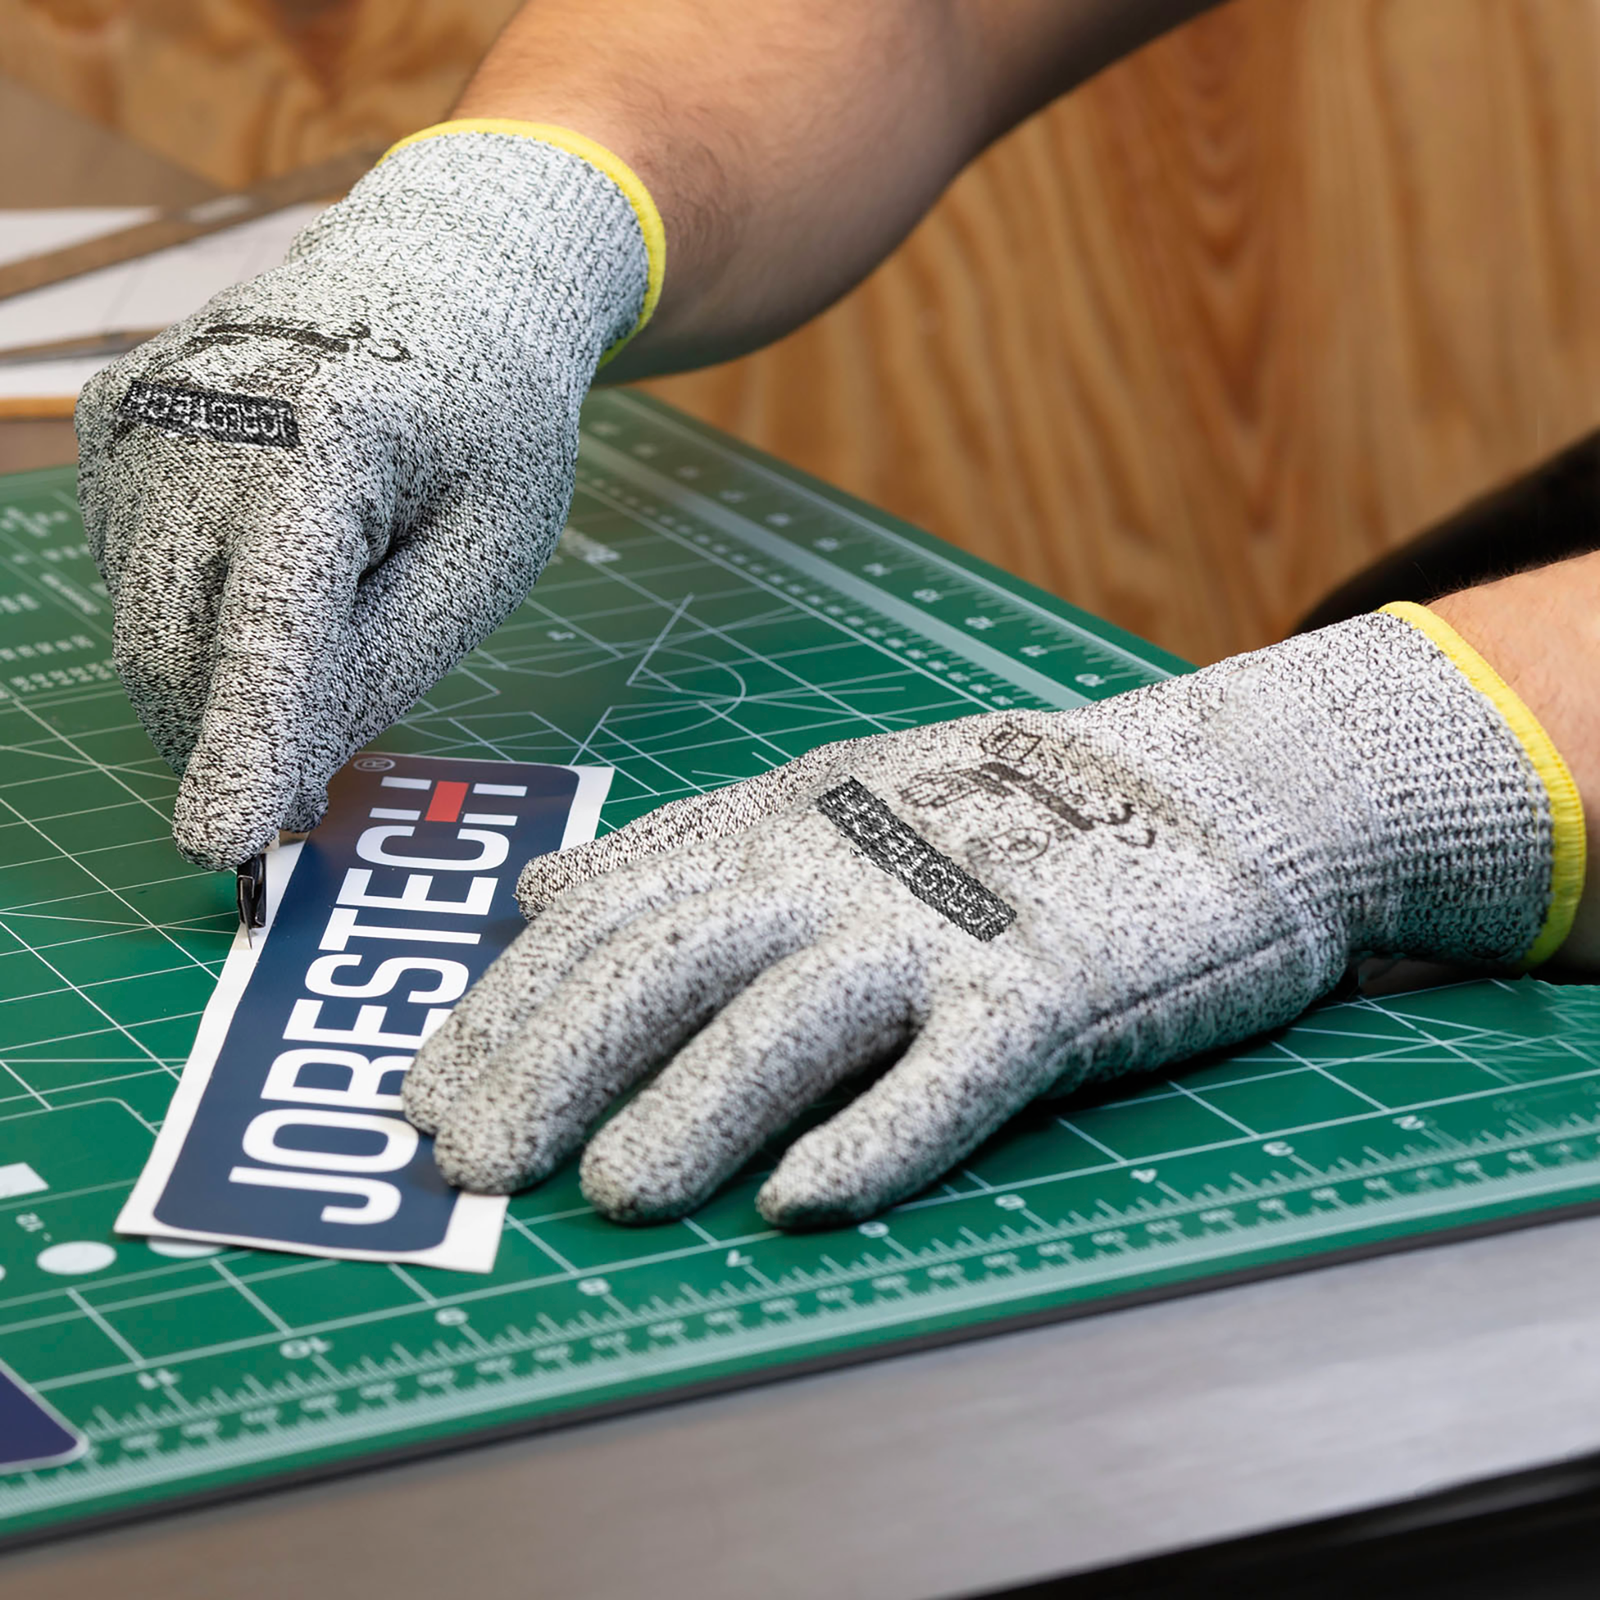 Worker wearing the Jorestech multi purpose safety work glove while cutting a piece of paper with an exact knife